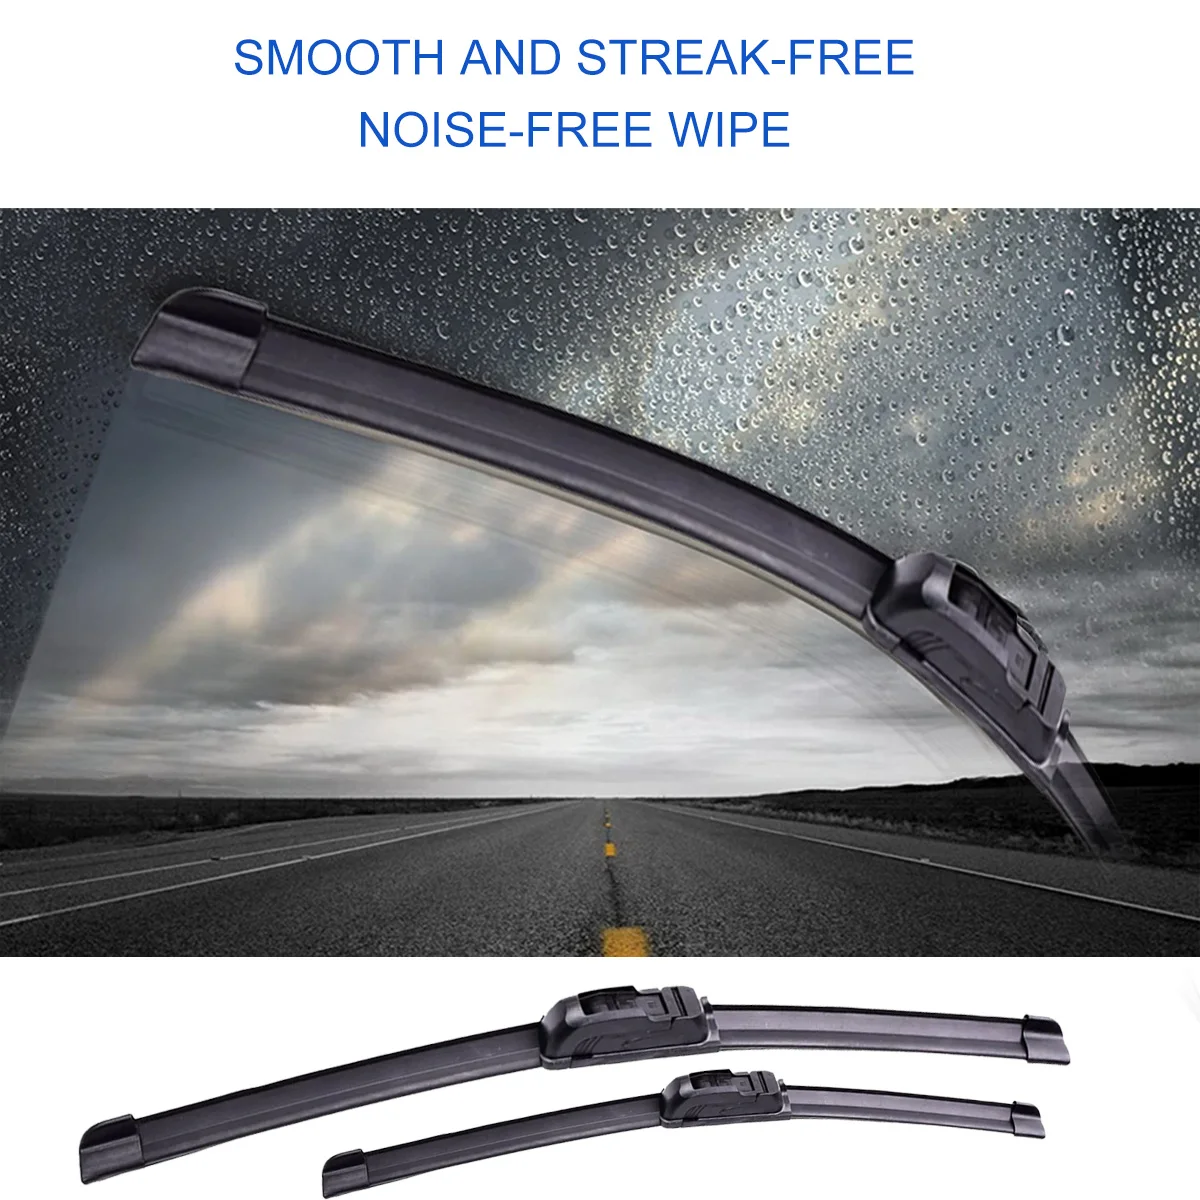 For SUZUKI SX4 S-Cross 2006-2020 Front Rear Wiper Blades Brushes Cutter Accessories J Hook 2014 2015 2016 2017 2018 2019 2020 images - 6